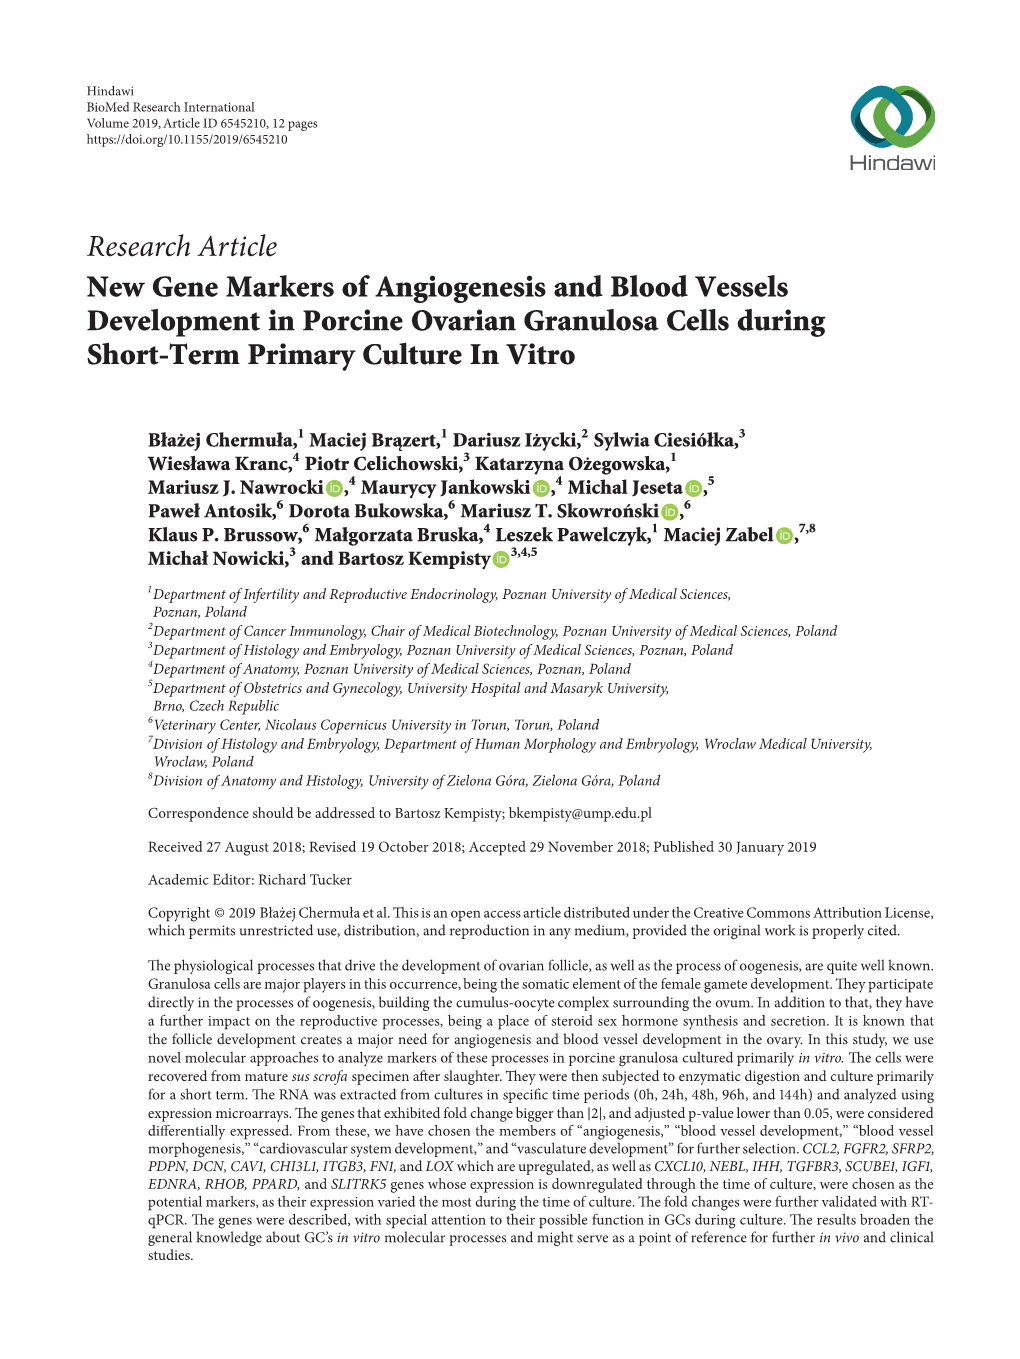 New Gene Markers of Angiogenesis and Blood Vessels Development in Porcine Ovarian Granulosa Cells During Short-Term Primary Culture in Vitro